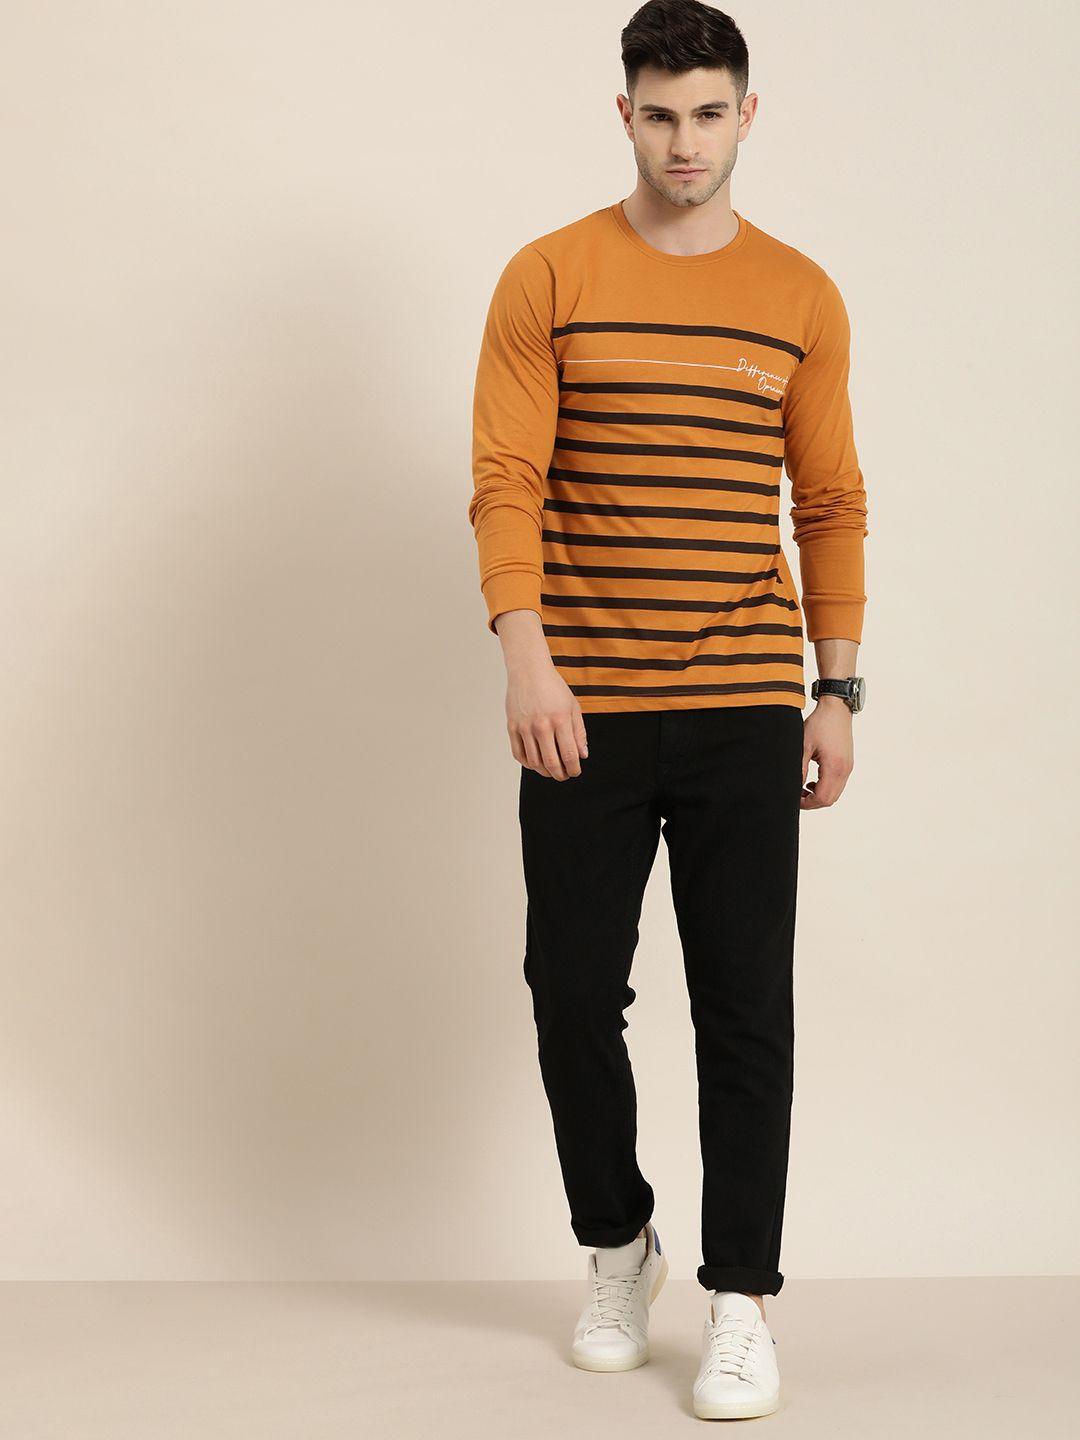 difference of opinion men rust brown & black striped round neck t-shirt